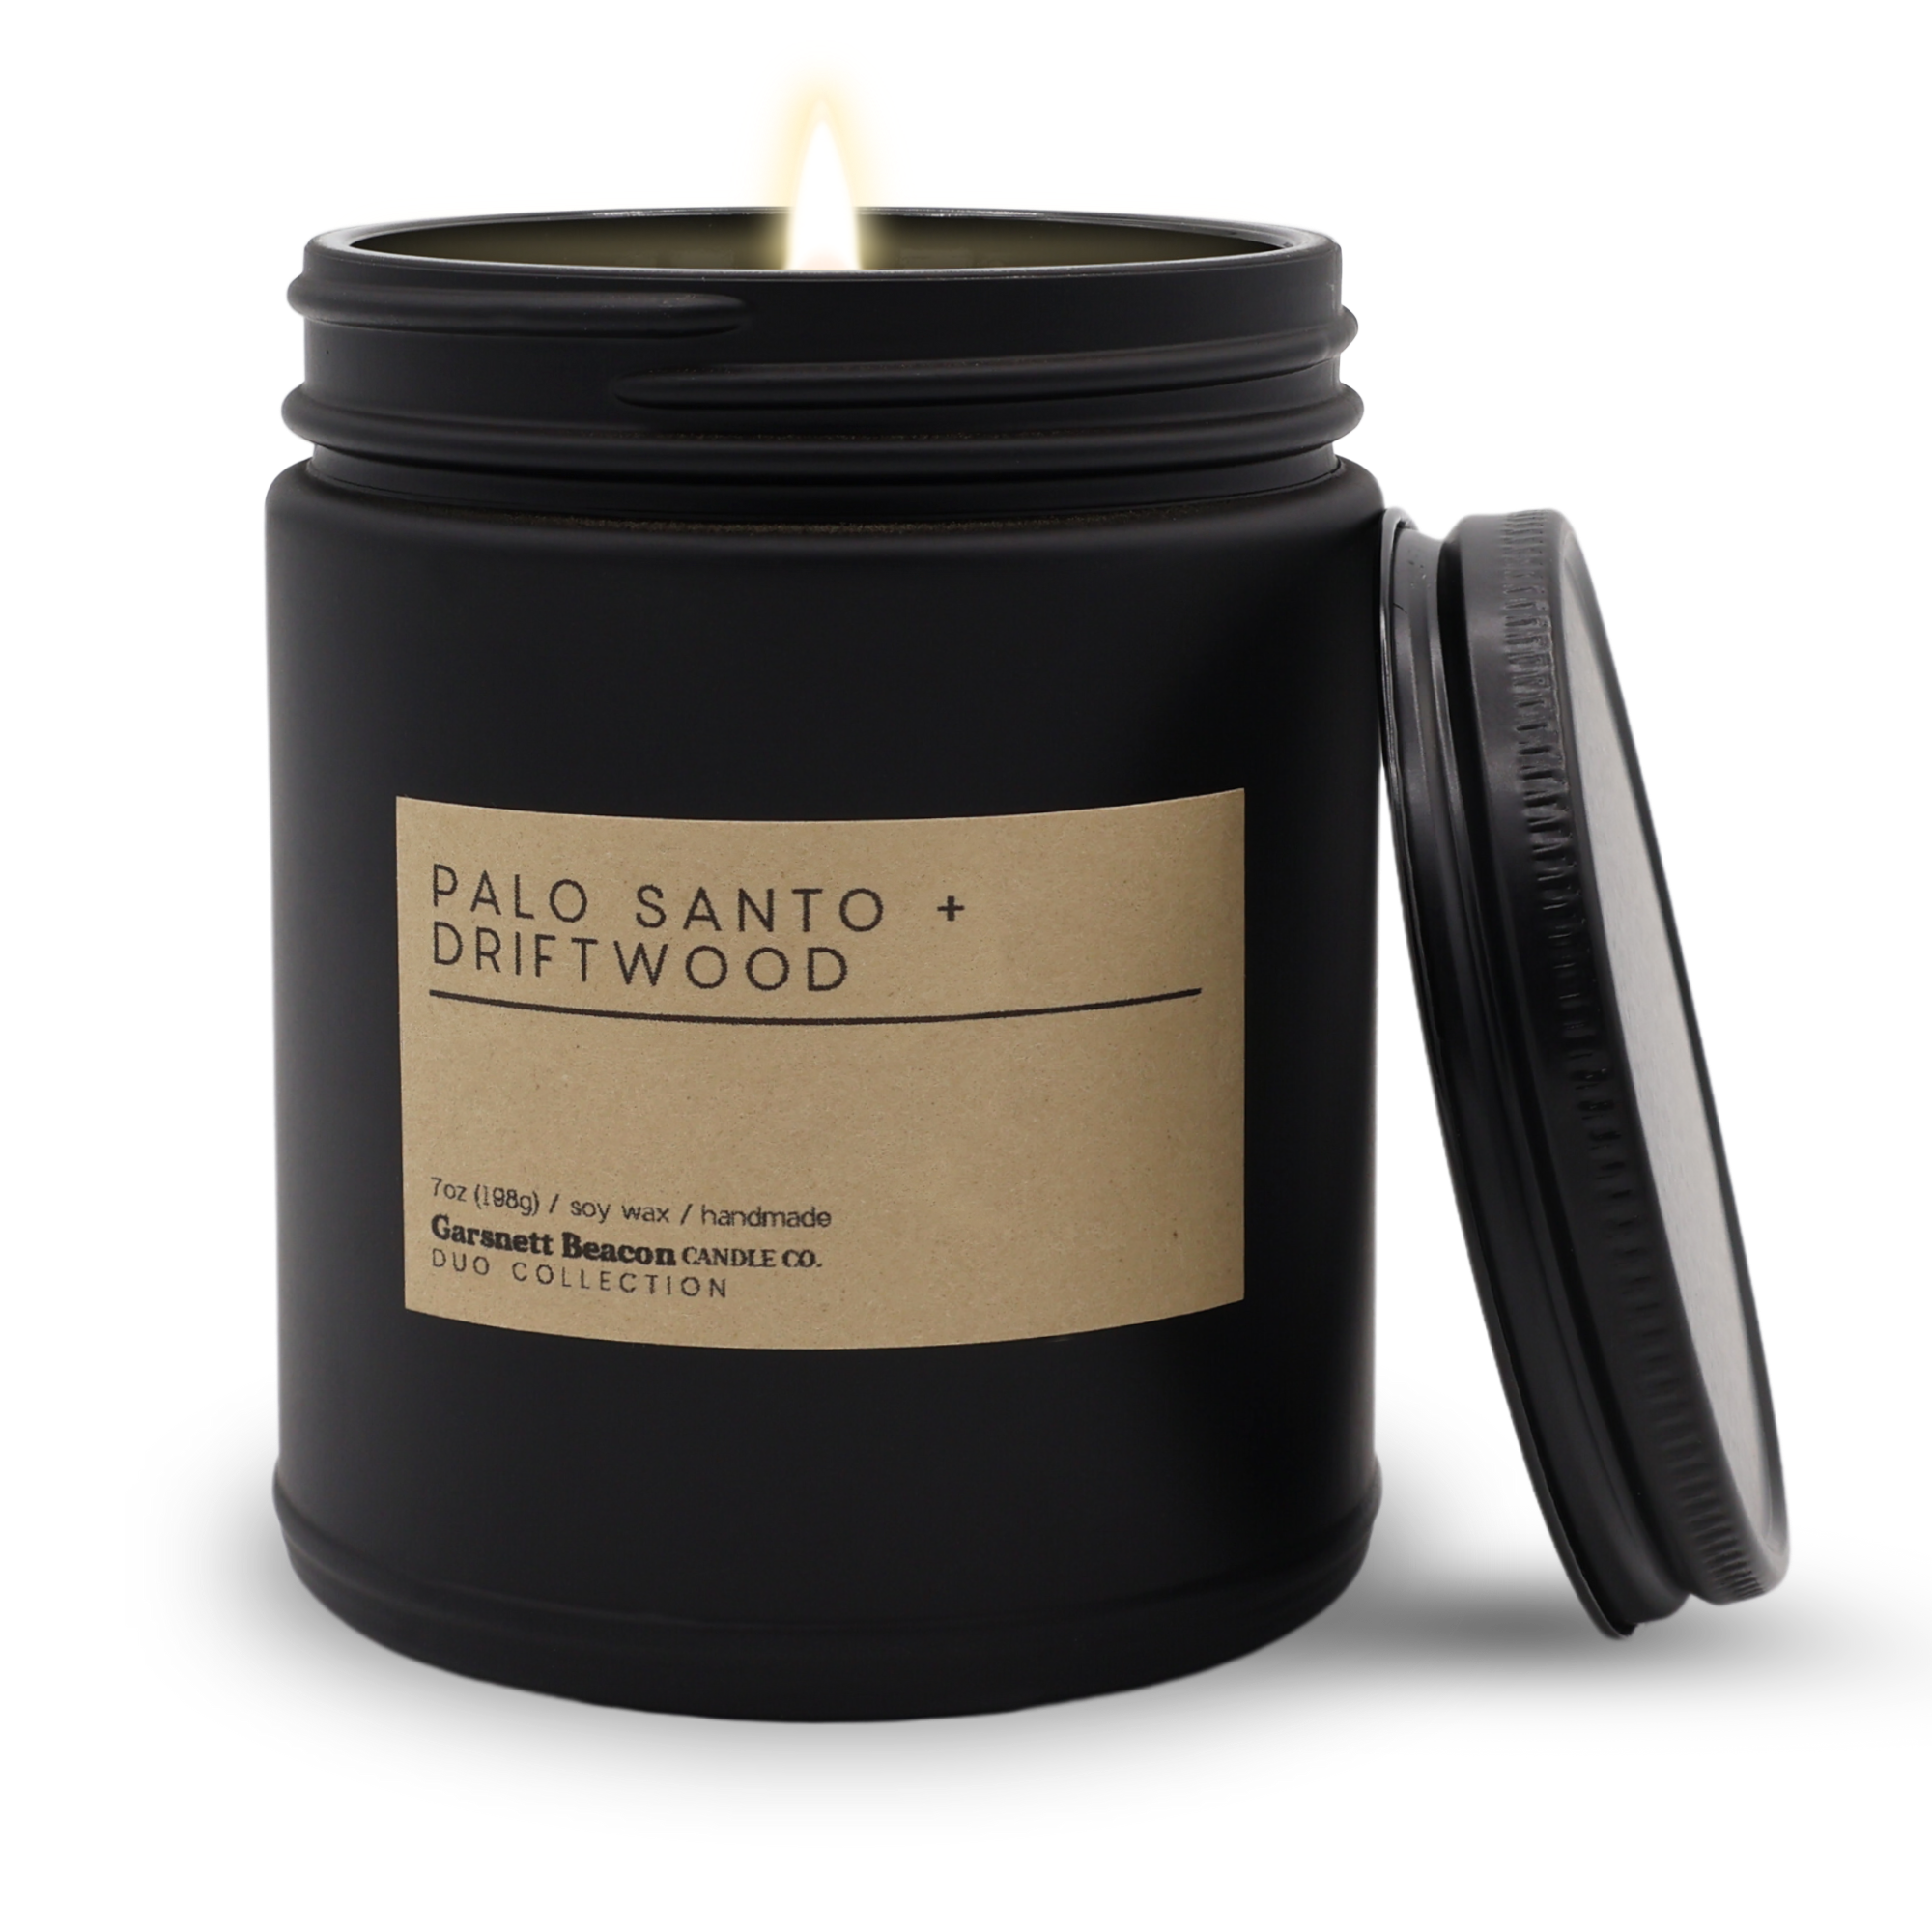 Palo Santo + Driftwood Luxury Scented Candle